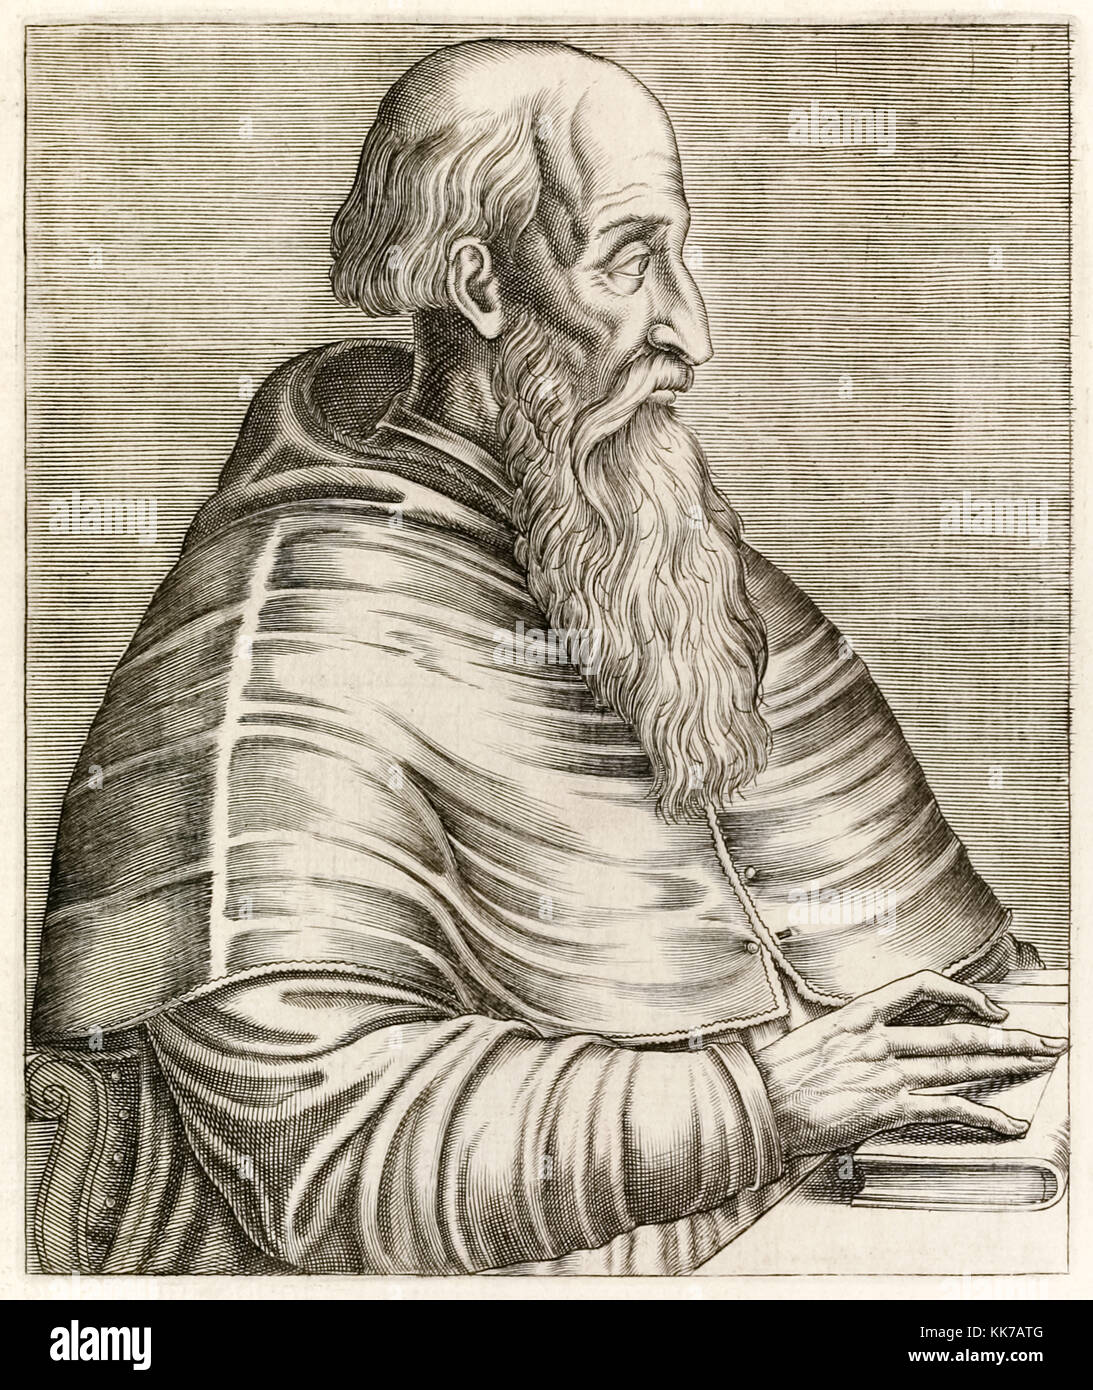 Pietro Bembo (1470-1547) Venetian and Italian scholar and poet whose most influential work was ‘Prose della volgar lingua’ about writing poetry in Italian. Engraving from “True Portraits…” by André Thévet (1516-1590) published in 1584. Stock Photo